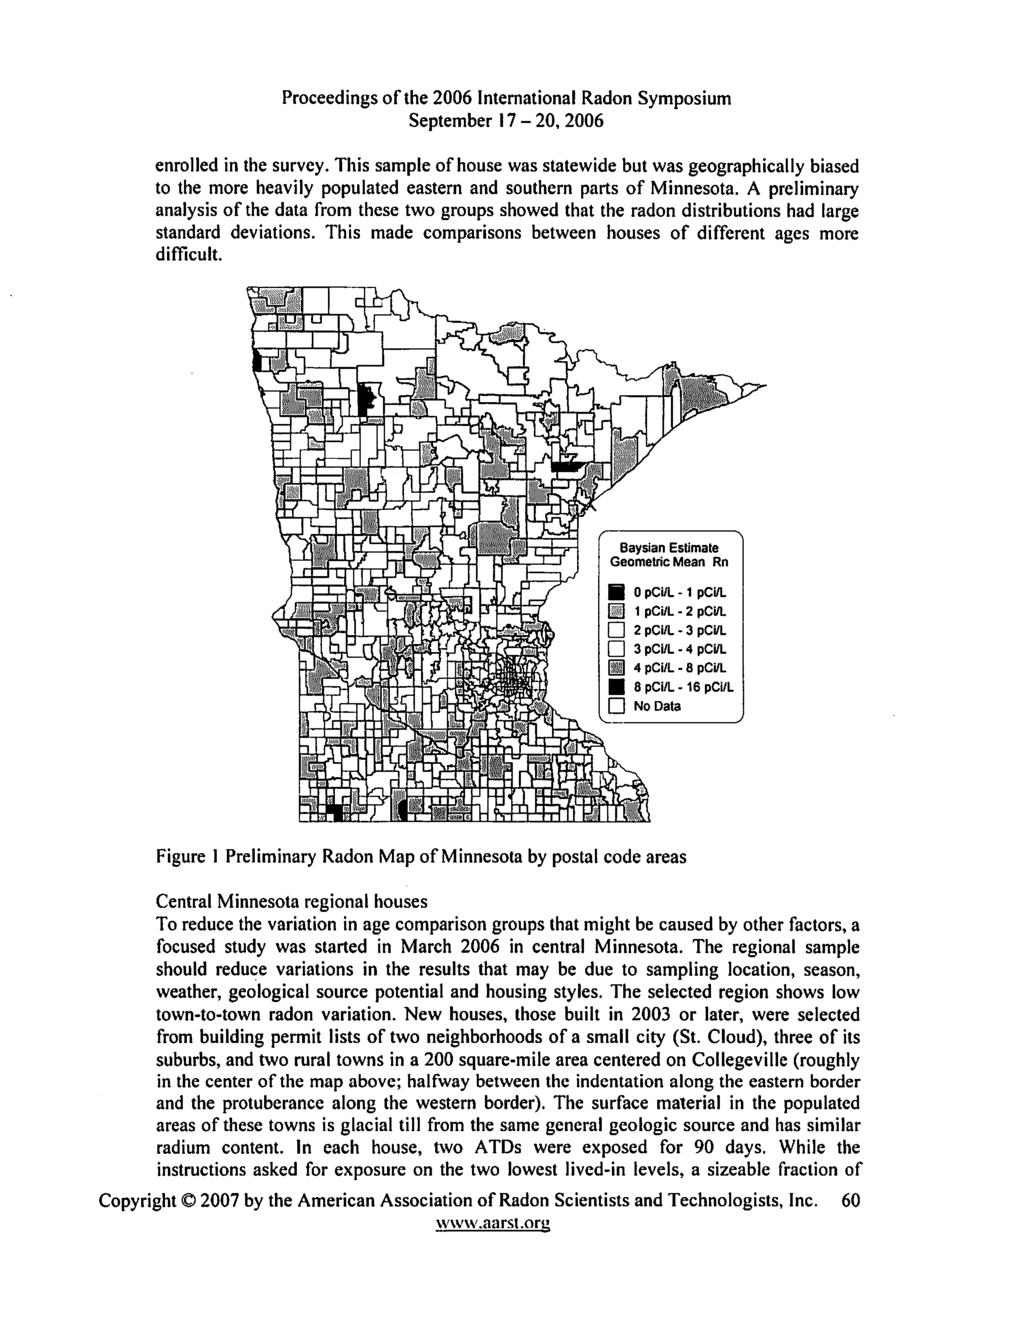 enrolled in the survey. This sample of house was statewide but was geographically biased to the more heavily populated eastern and southern parts of Minnesota.